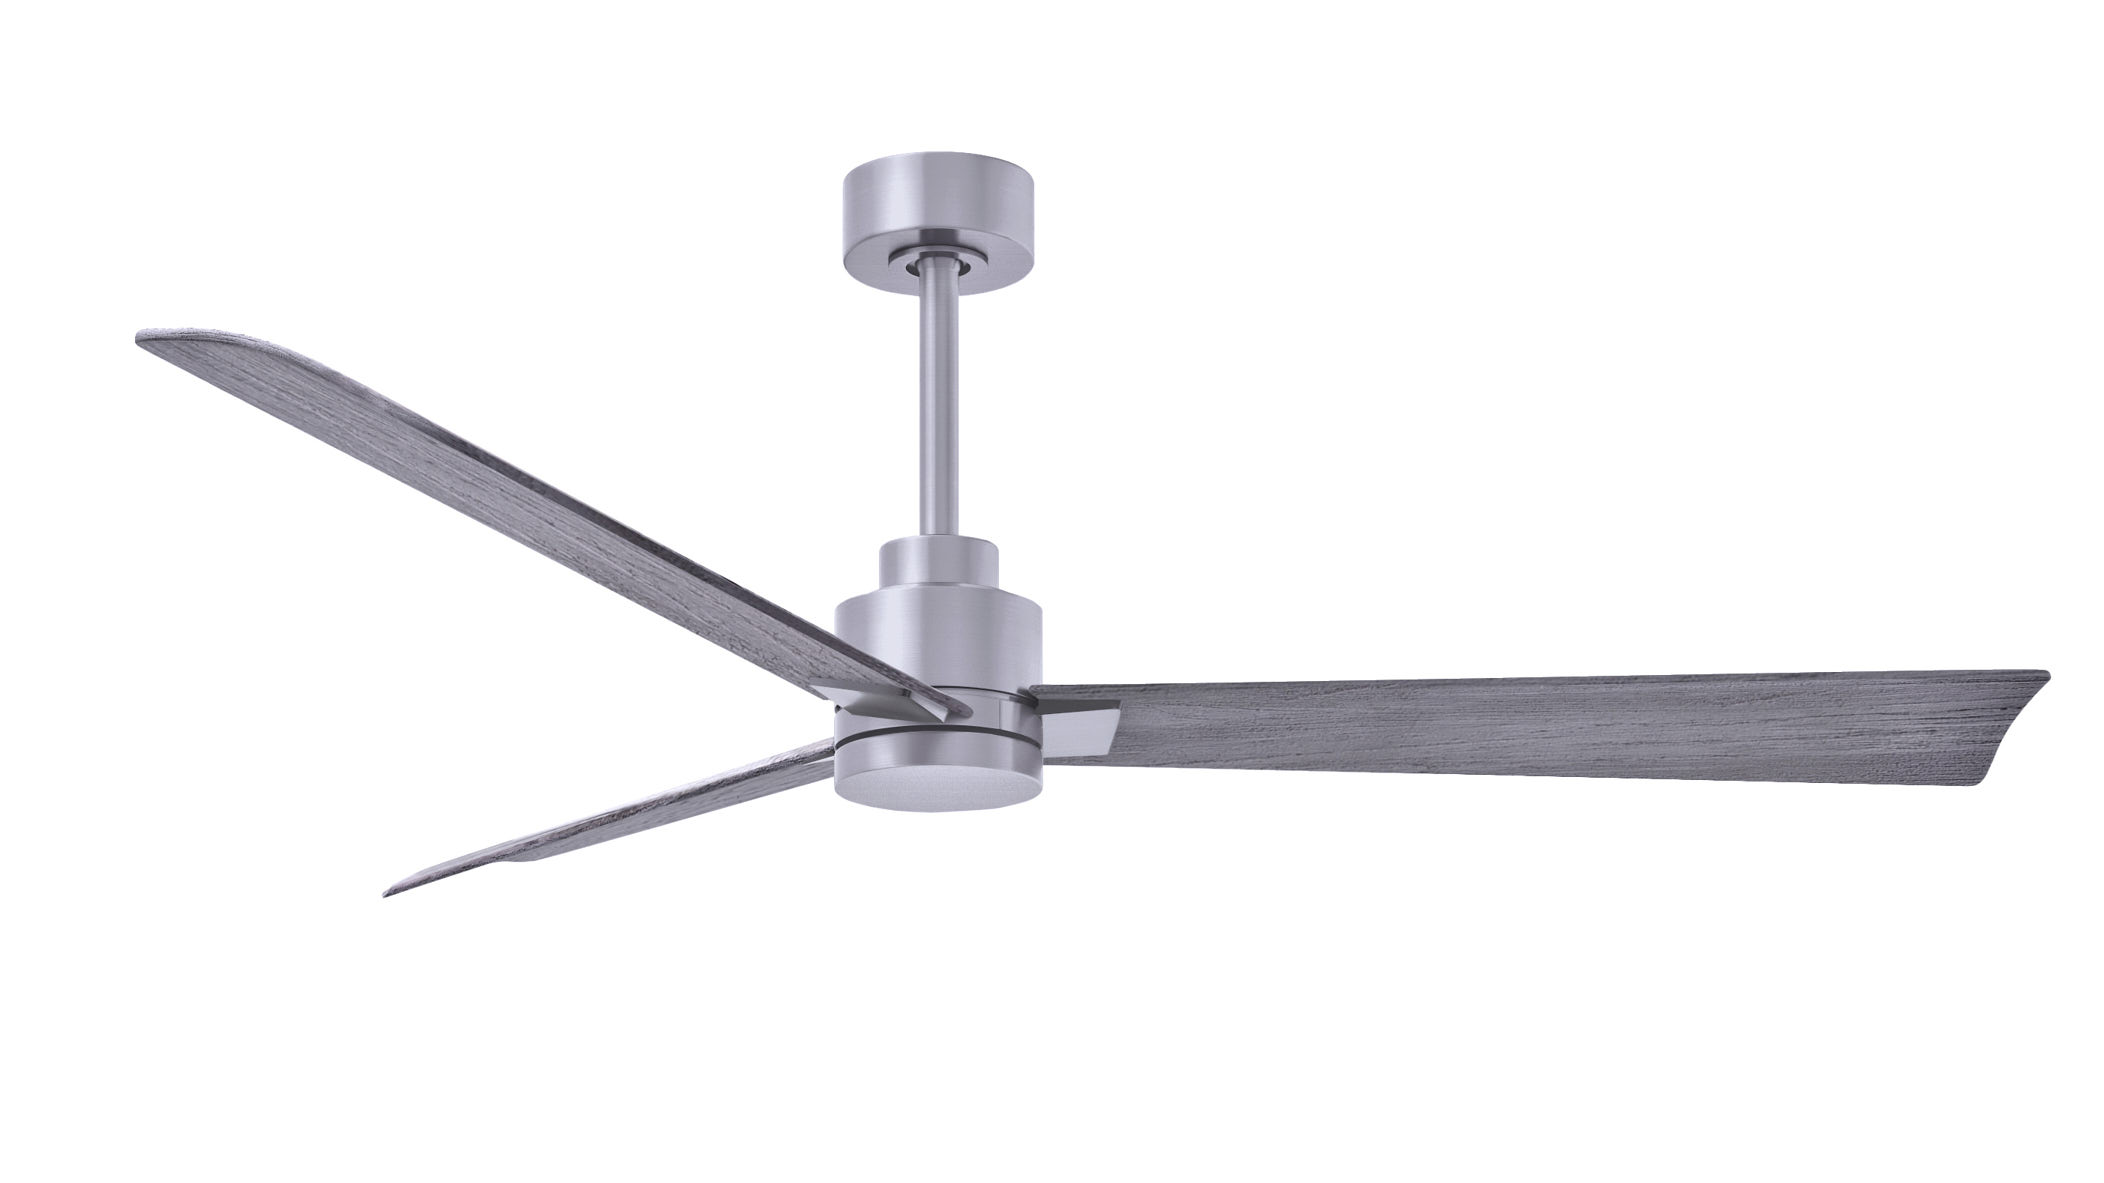 Alessandra ceiling fan in brushed nickel finish with 56